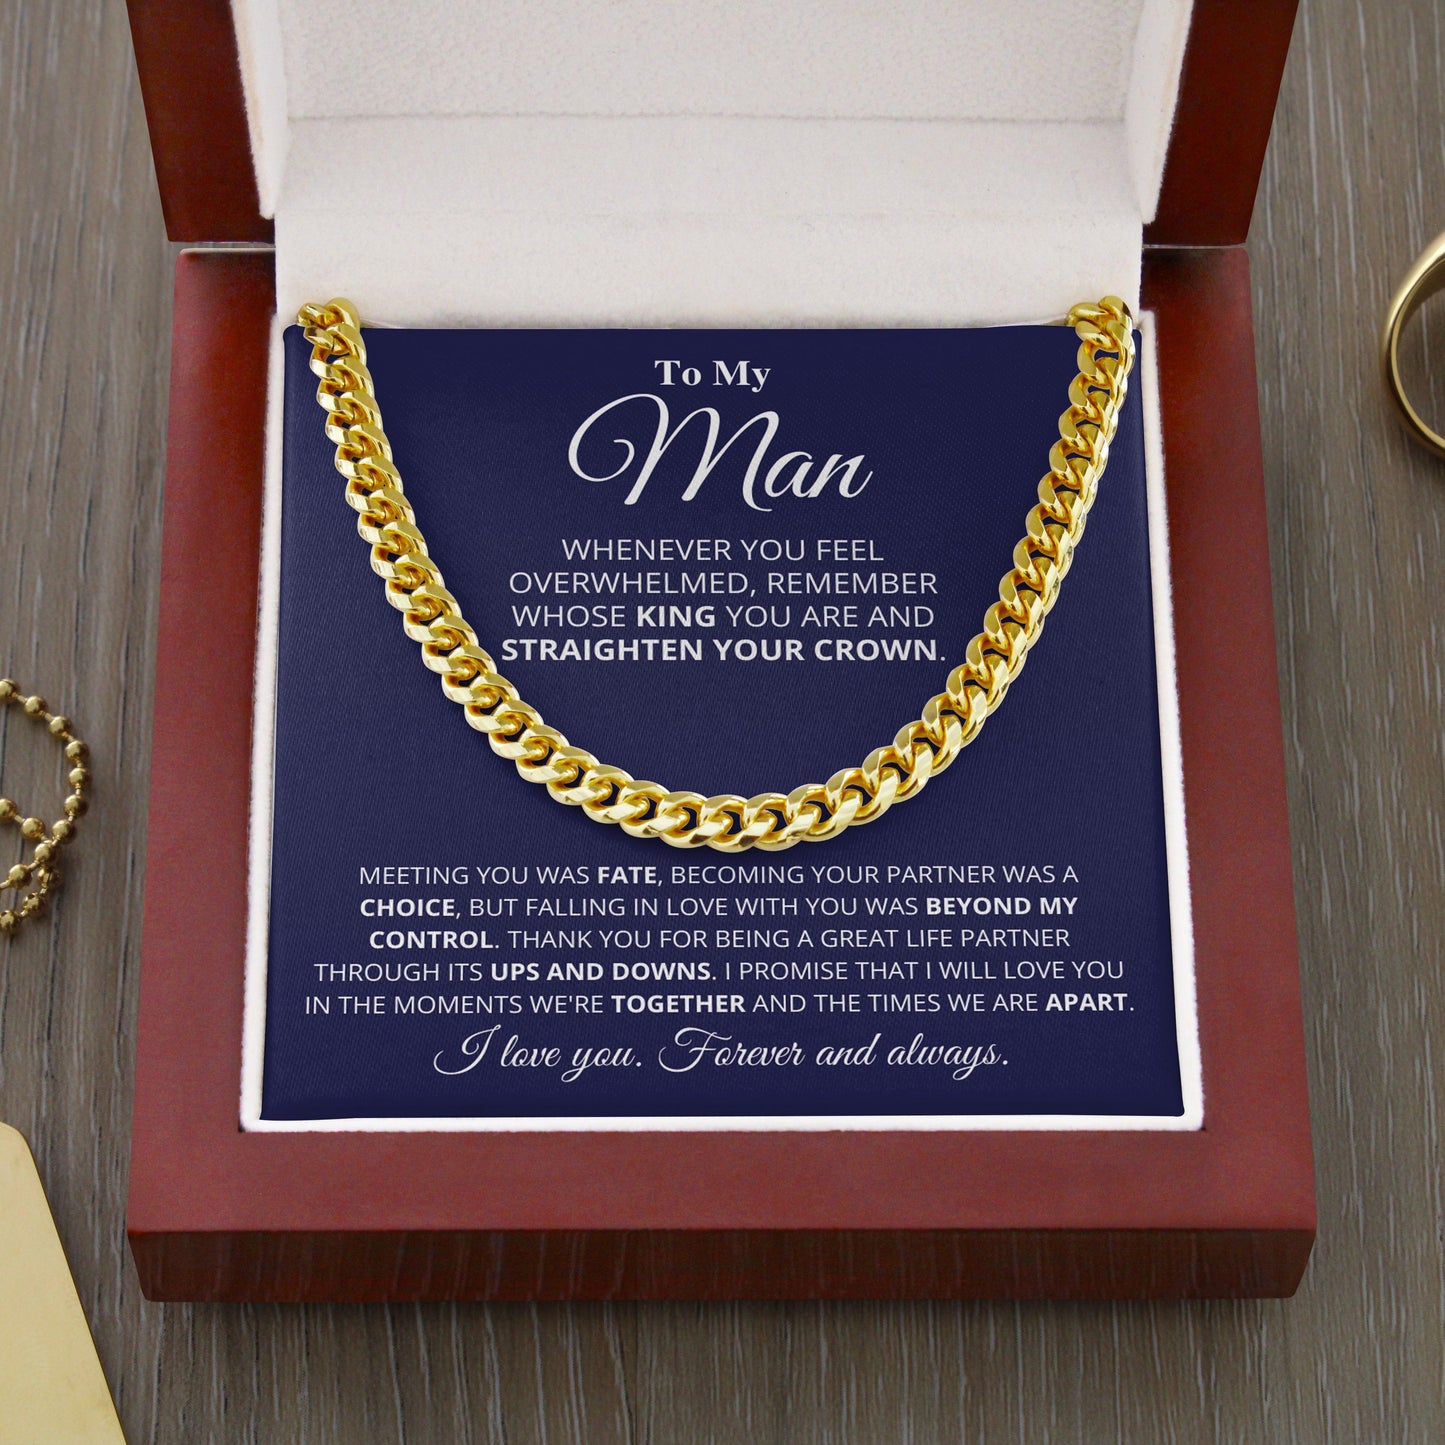 Jewelry gifts My Man - My Choice - Cuban Link Chain - Belesmé - Memorable Jewelry Gifts 